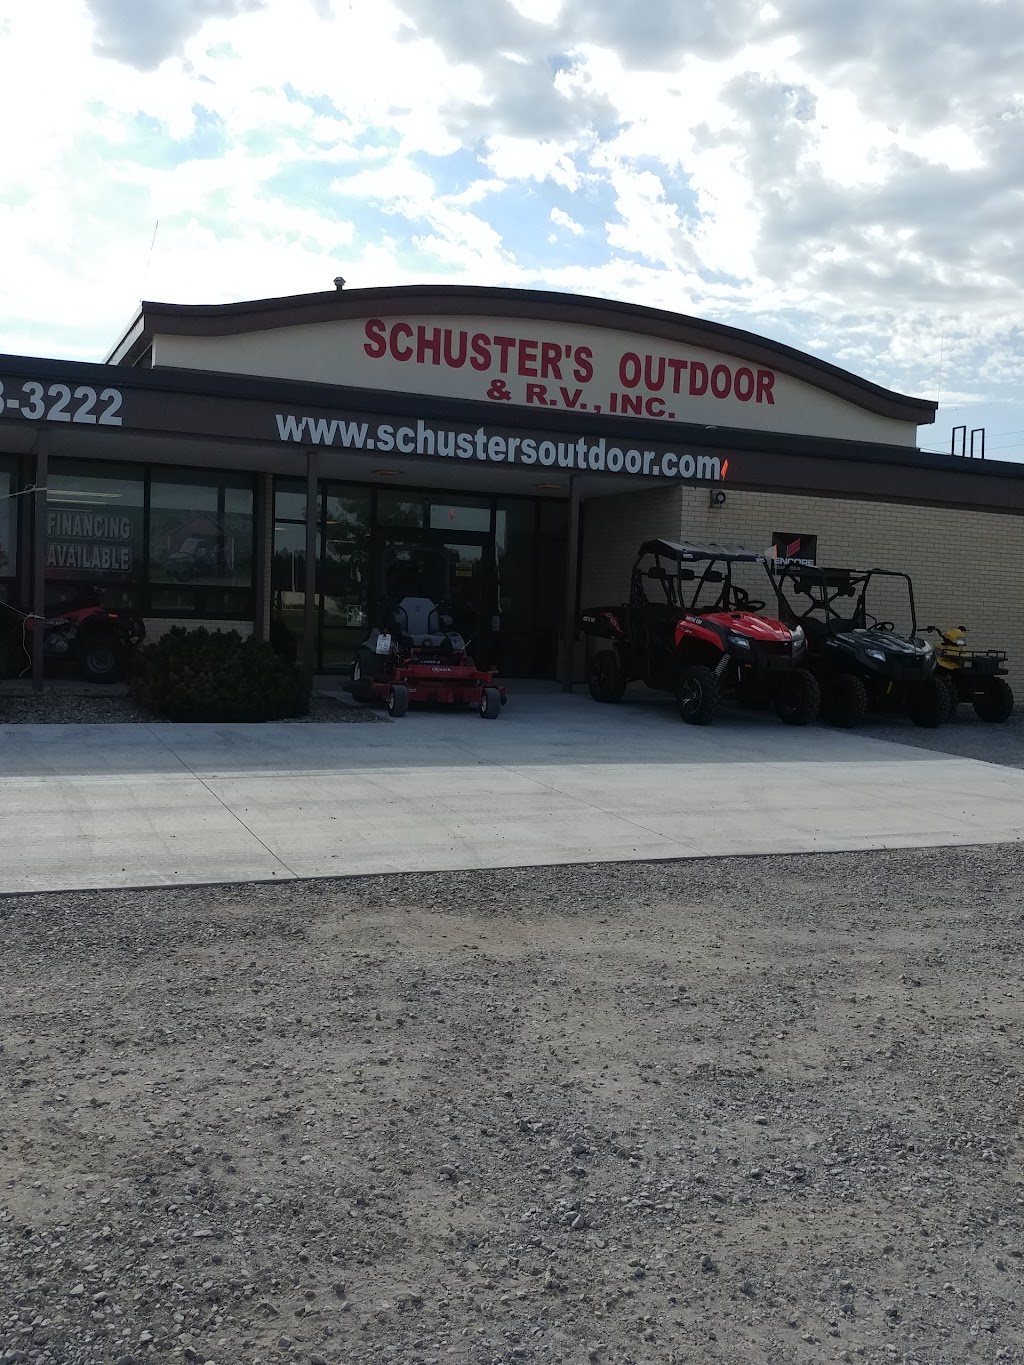 Schusters Outdoor & R.V., Inc. | 210 S Reed St, Beatrice, NE 68310, USA | Phone: (402) 228-3222